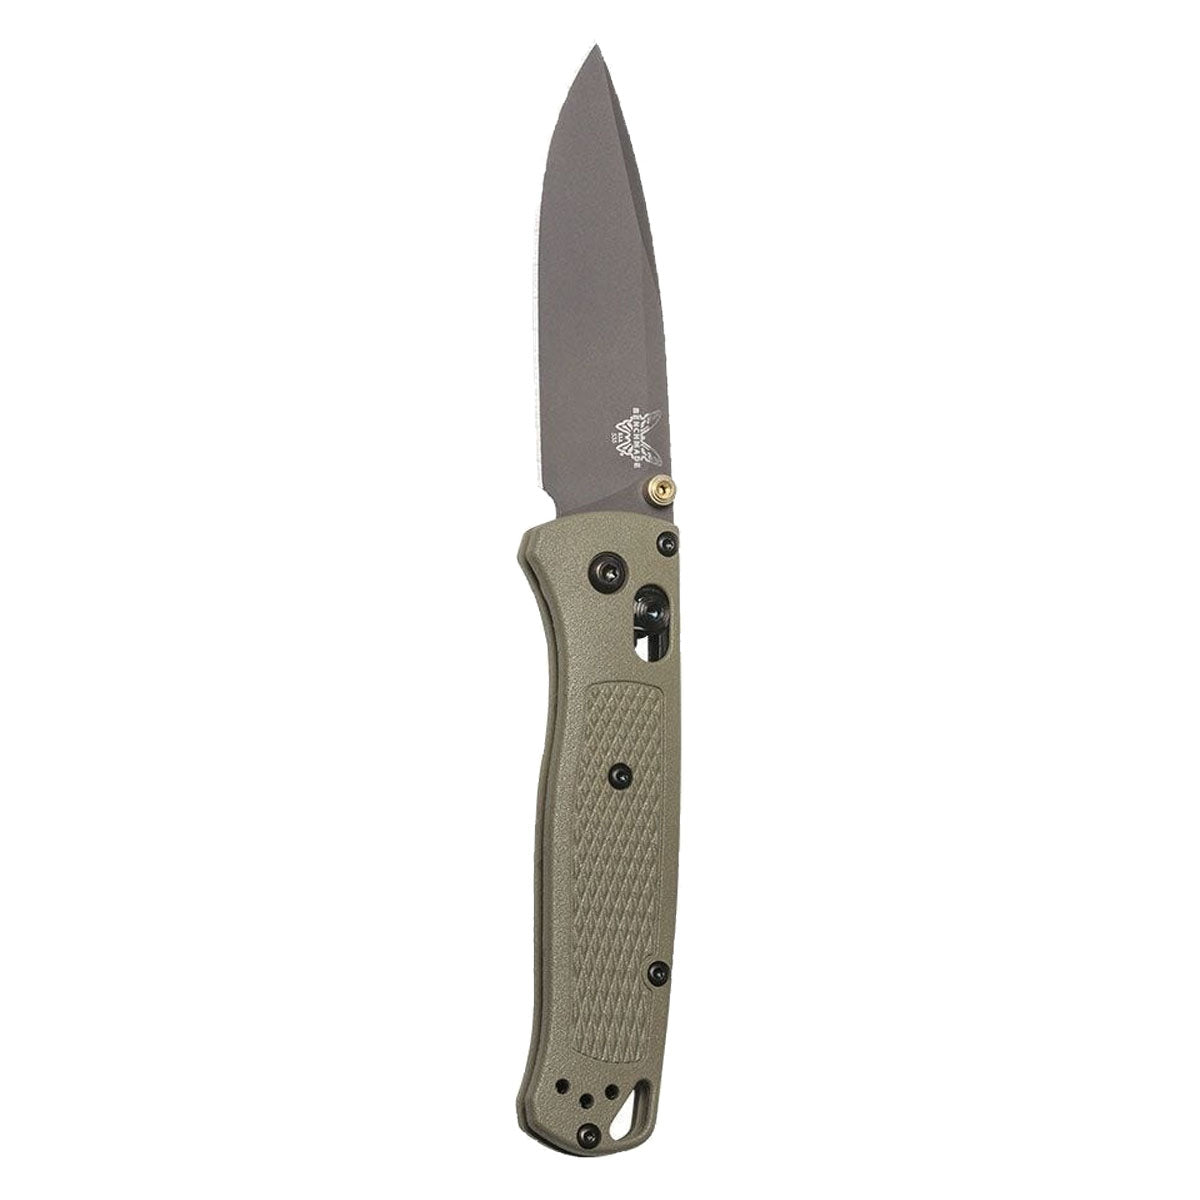 Benchmade 535 Bugout in  by GOHUNT | Benchmade - GOHUNT Shop